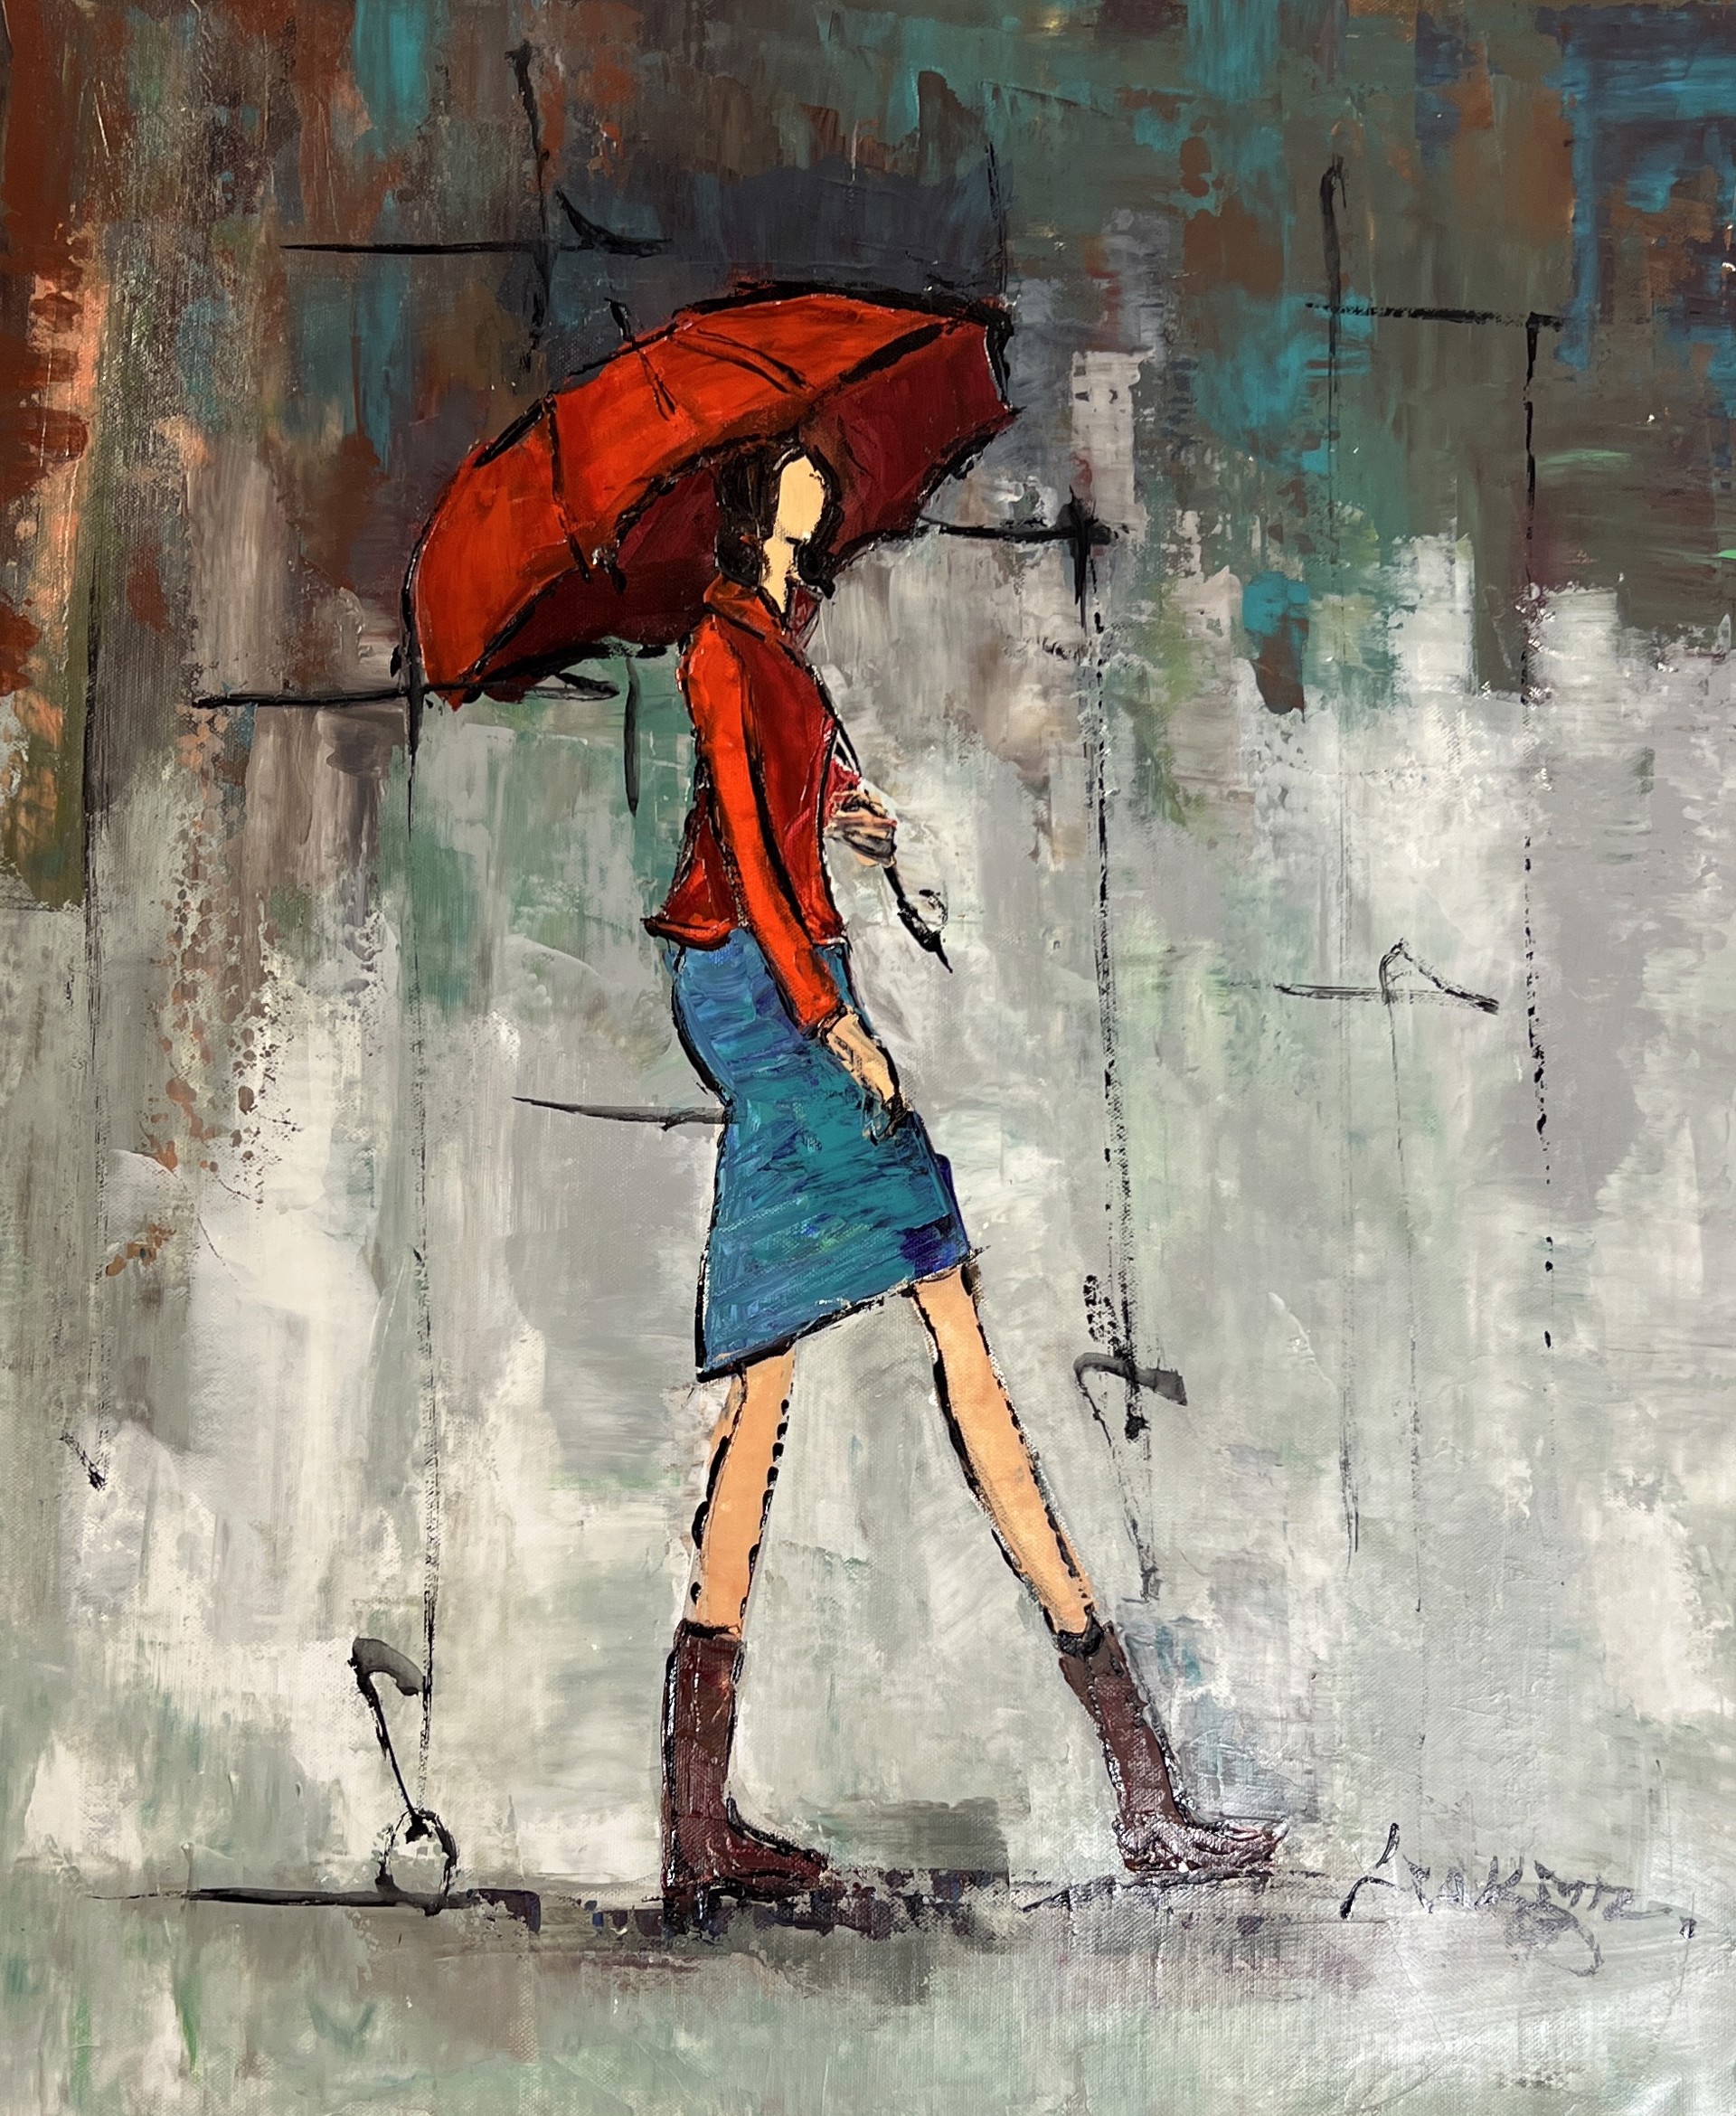 RED UMBRELLA AND BROWN BOOTS by LIA KIM